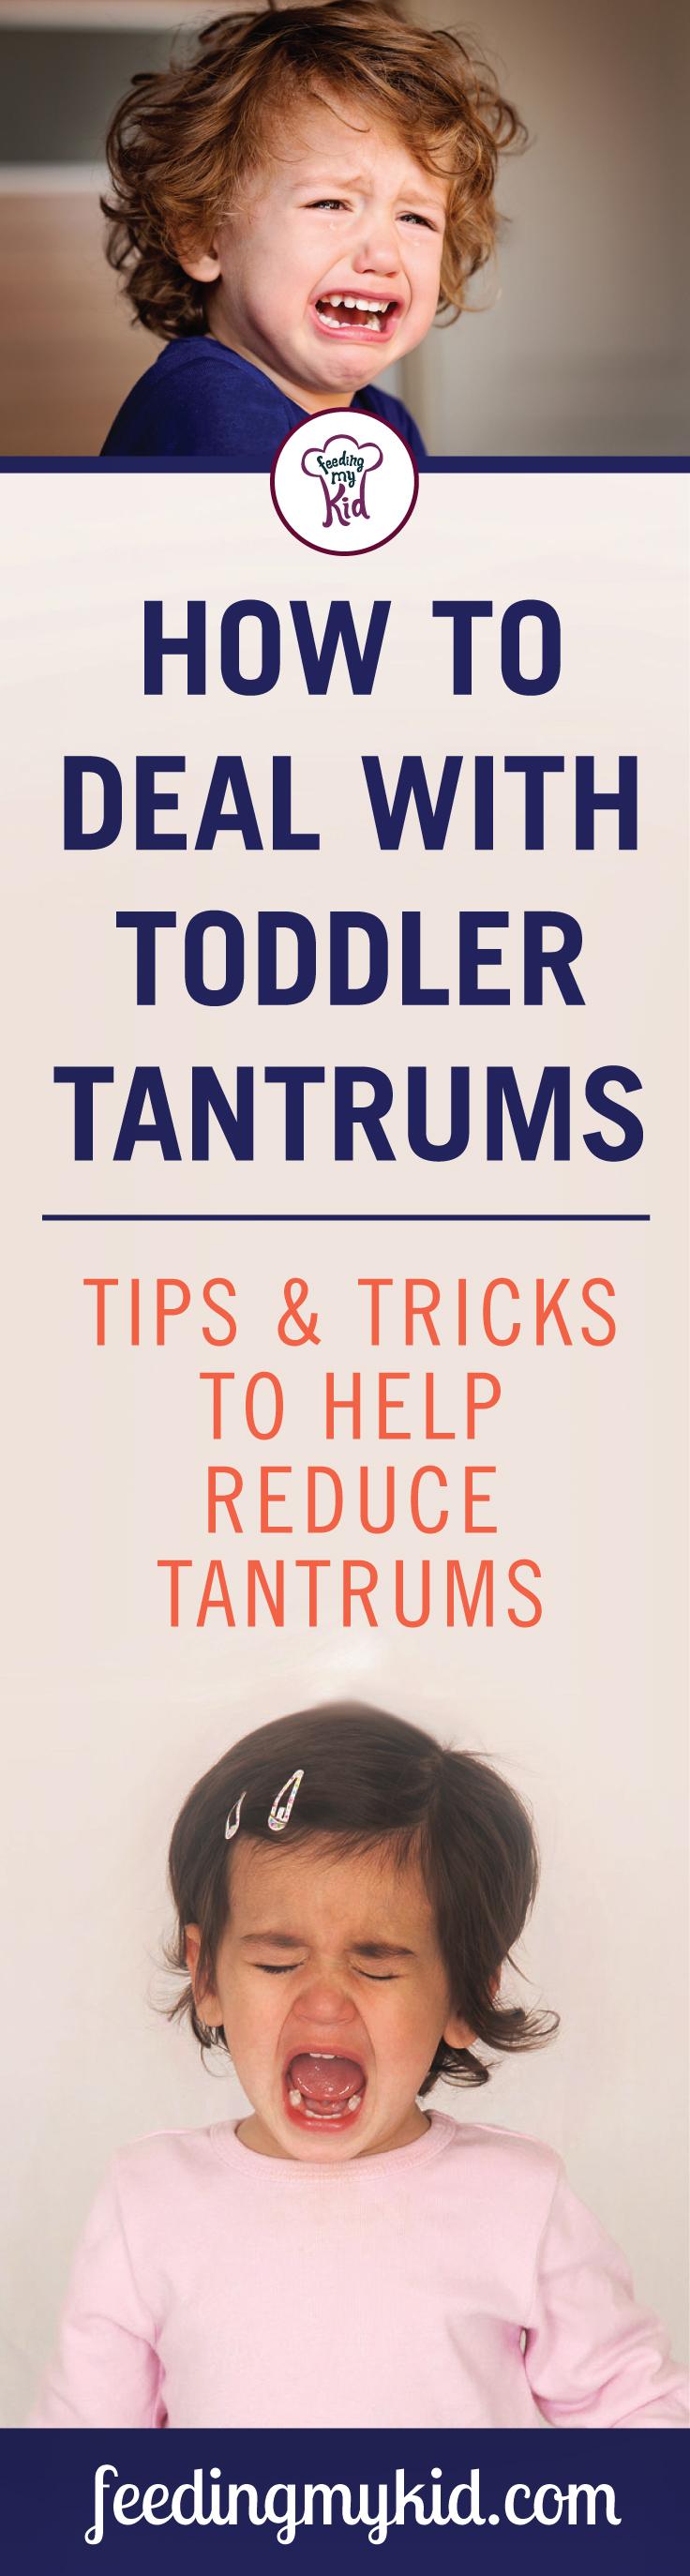 This is a must pin! Find out everything you need to know on how to deal with toddler tantrums in this article filled with great video resources. Stop toddler tantrums before they start. Feeding My Kid is a filled with all the information you need about how to raise your kids, from healthy tips to nutritious recipes. #tantrums #toddlertantrums #tips #parenting